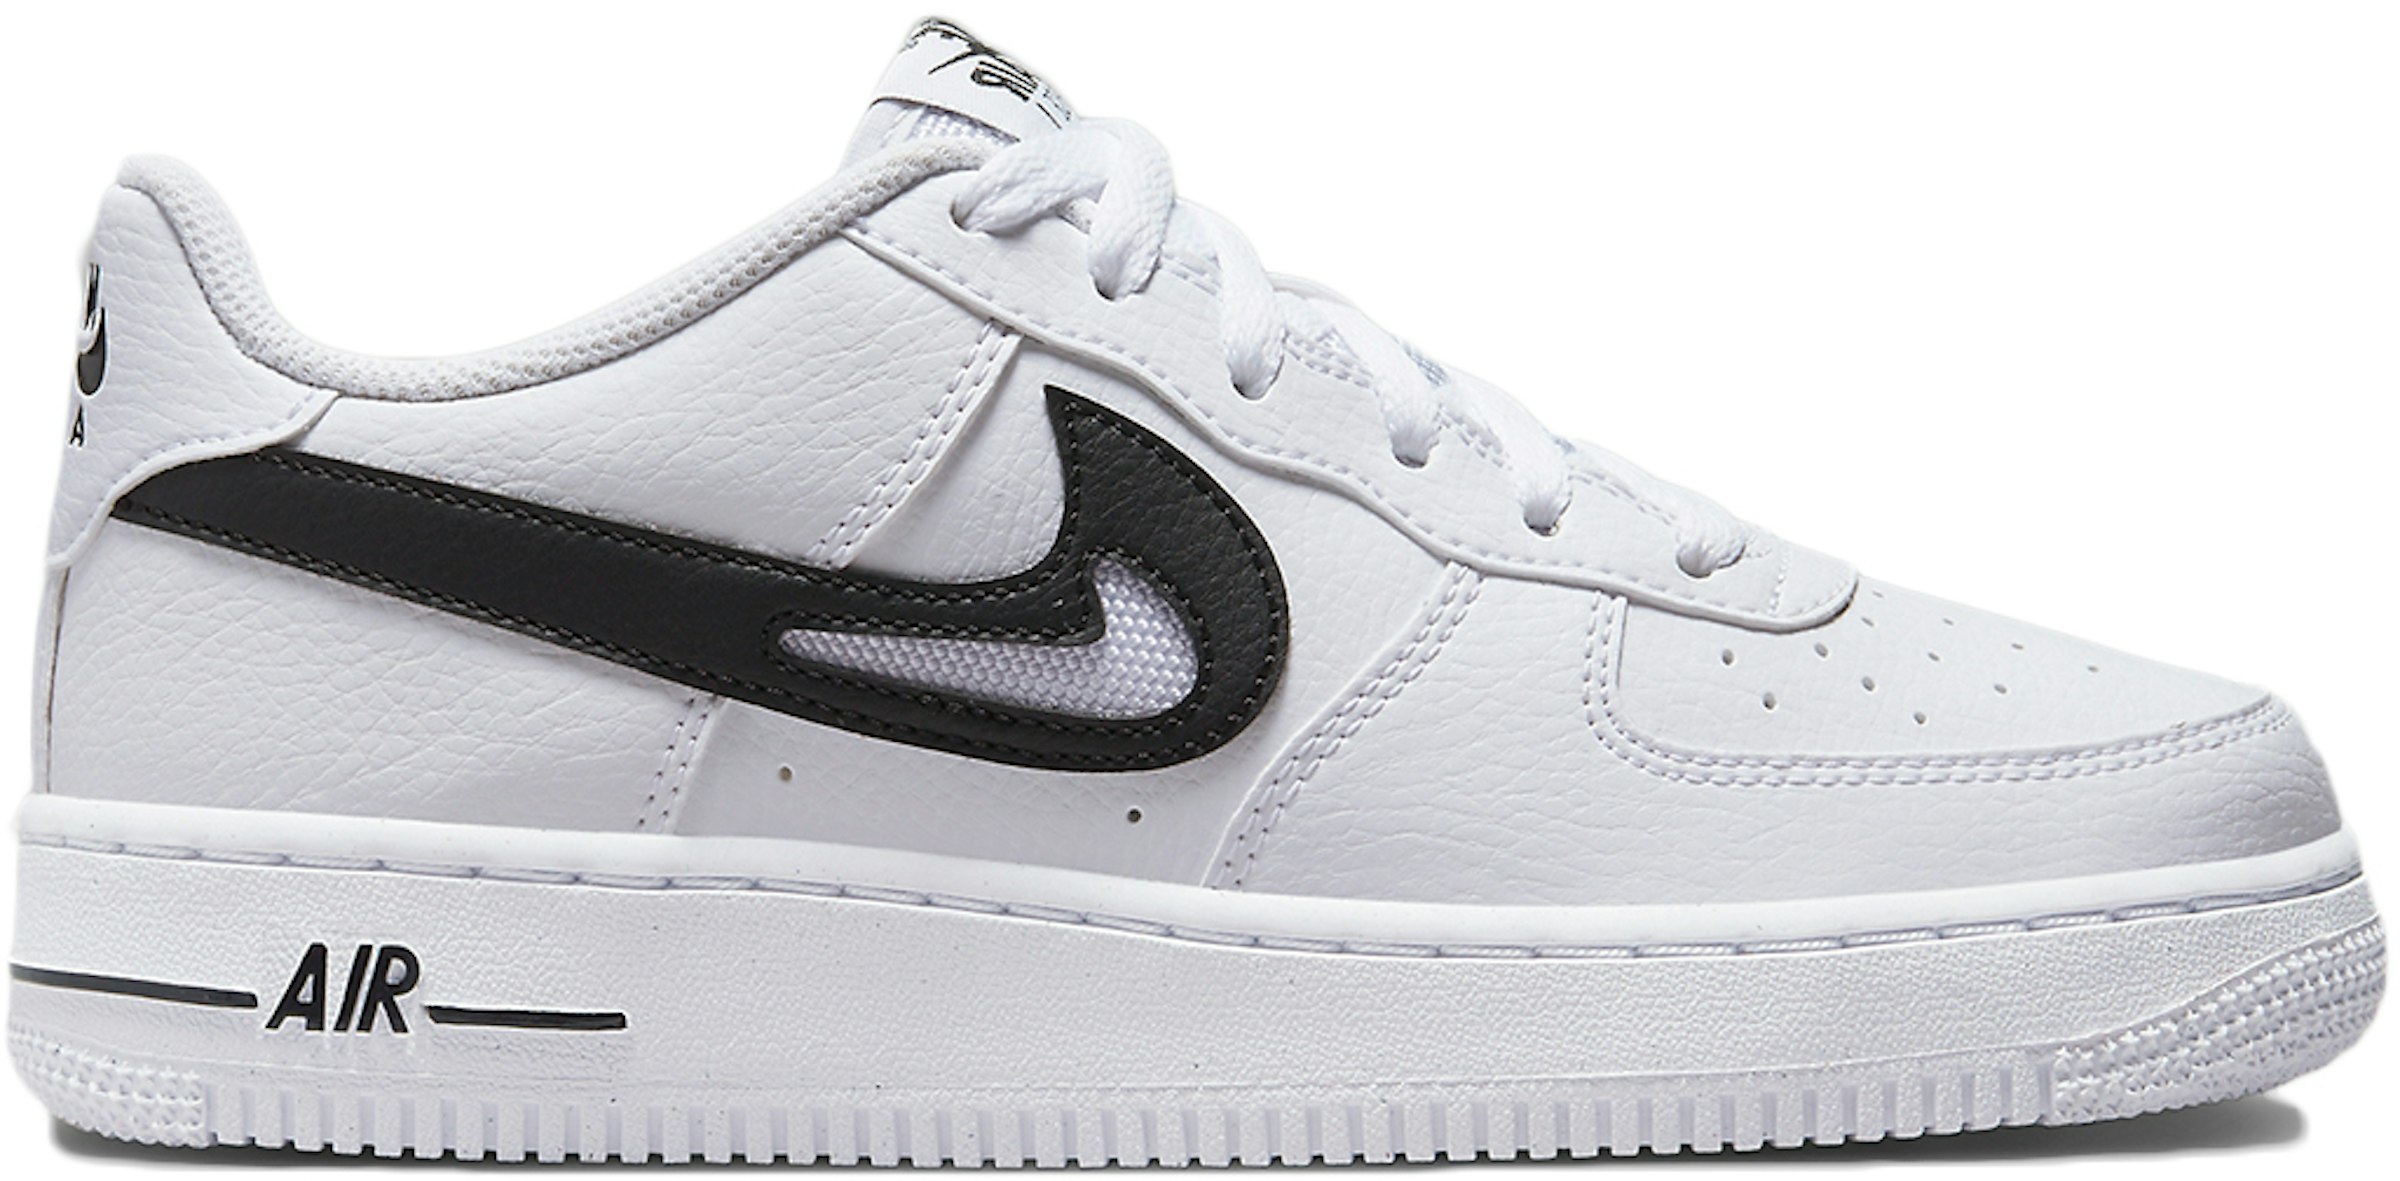 Nike Air Force 1 Low Cut Out Swoosh White Black (GS) - DR7889-100 -